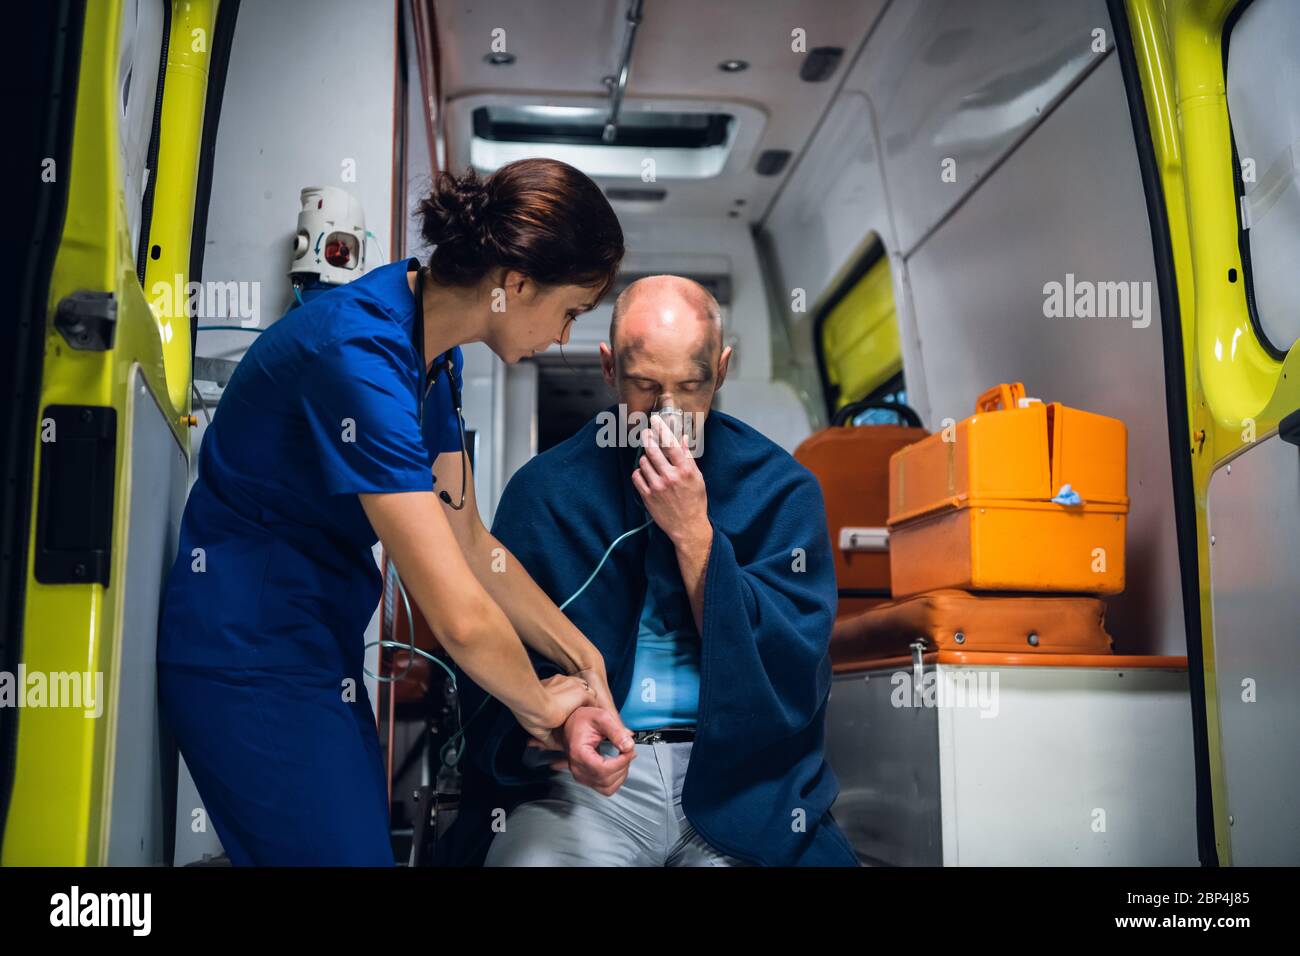 An injured, shocked man sitting with an oxygen mask in an ambulance, woman in a medical uniform is checking his pulse Stock Photo